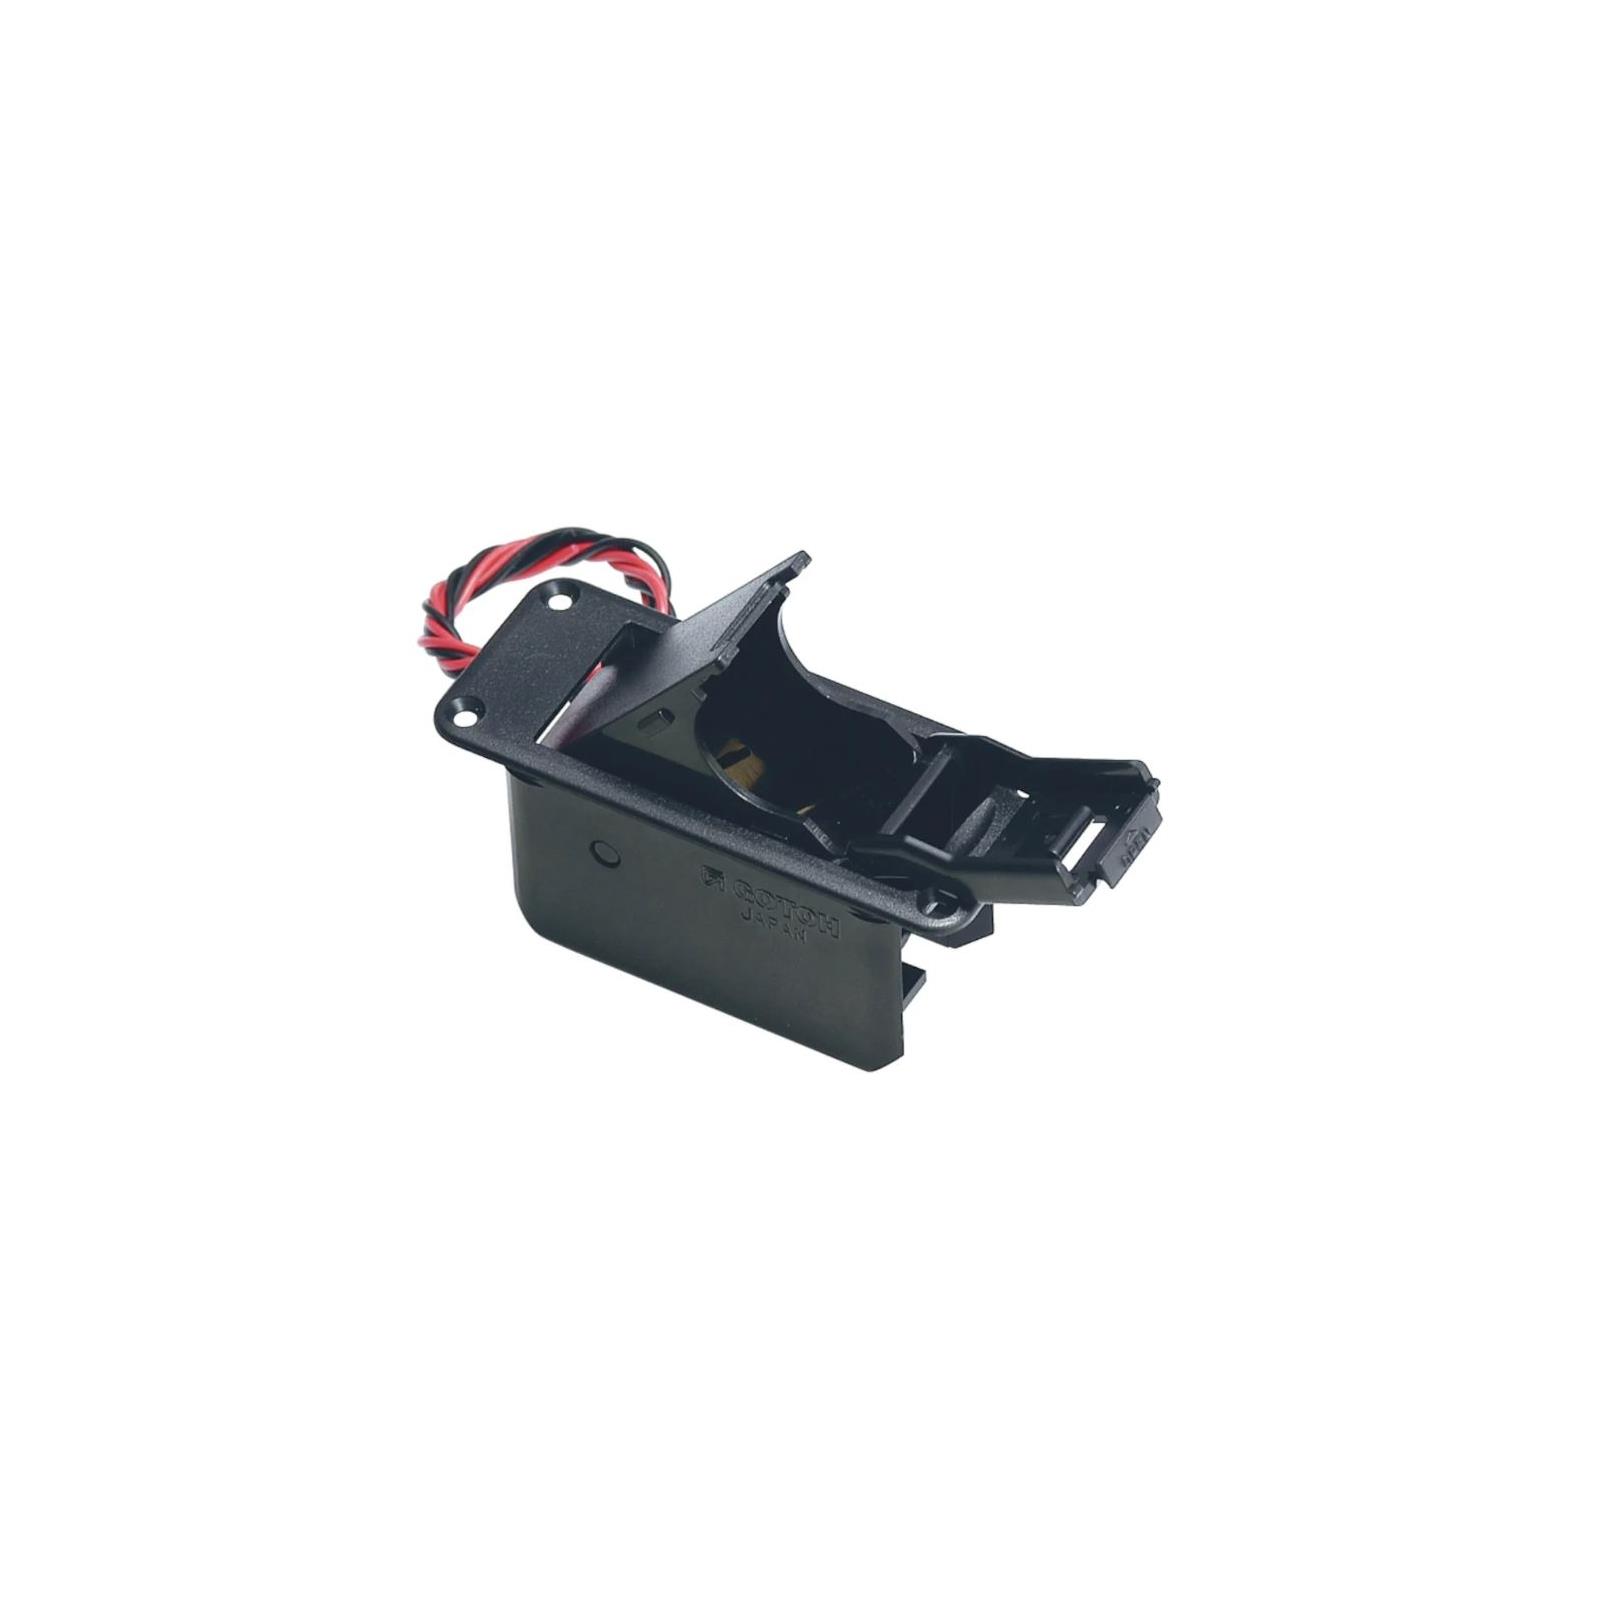 All Parts 9v Battery Compartment Horizontal